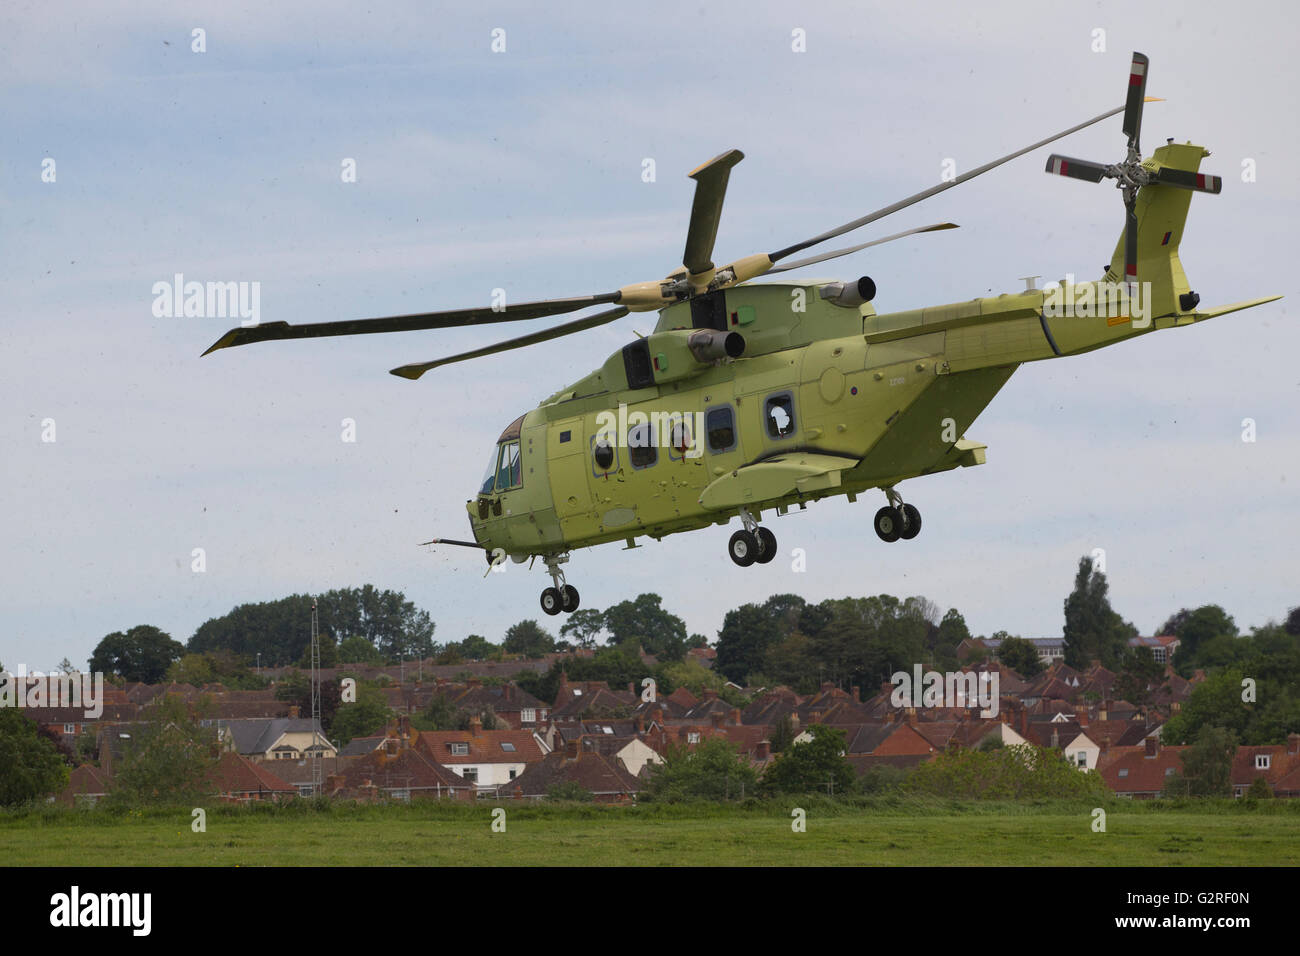 AgustaWestland AW101 heilicopter being tested at the Leonardo-Finmeccanica company’s assembly site in Yeovil, Somerset,  UK Stock Photo